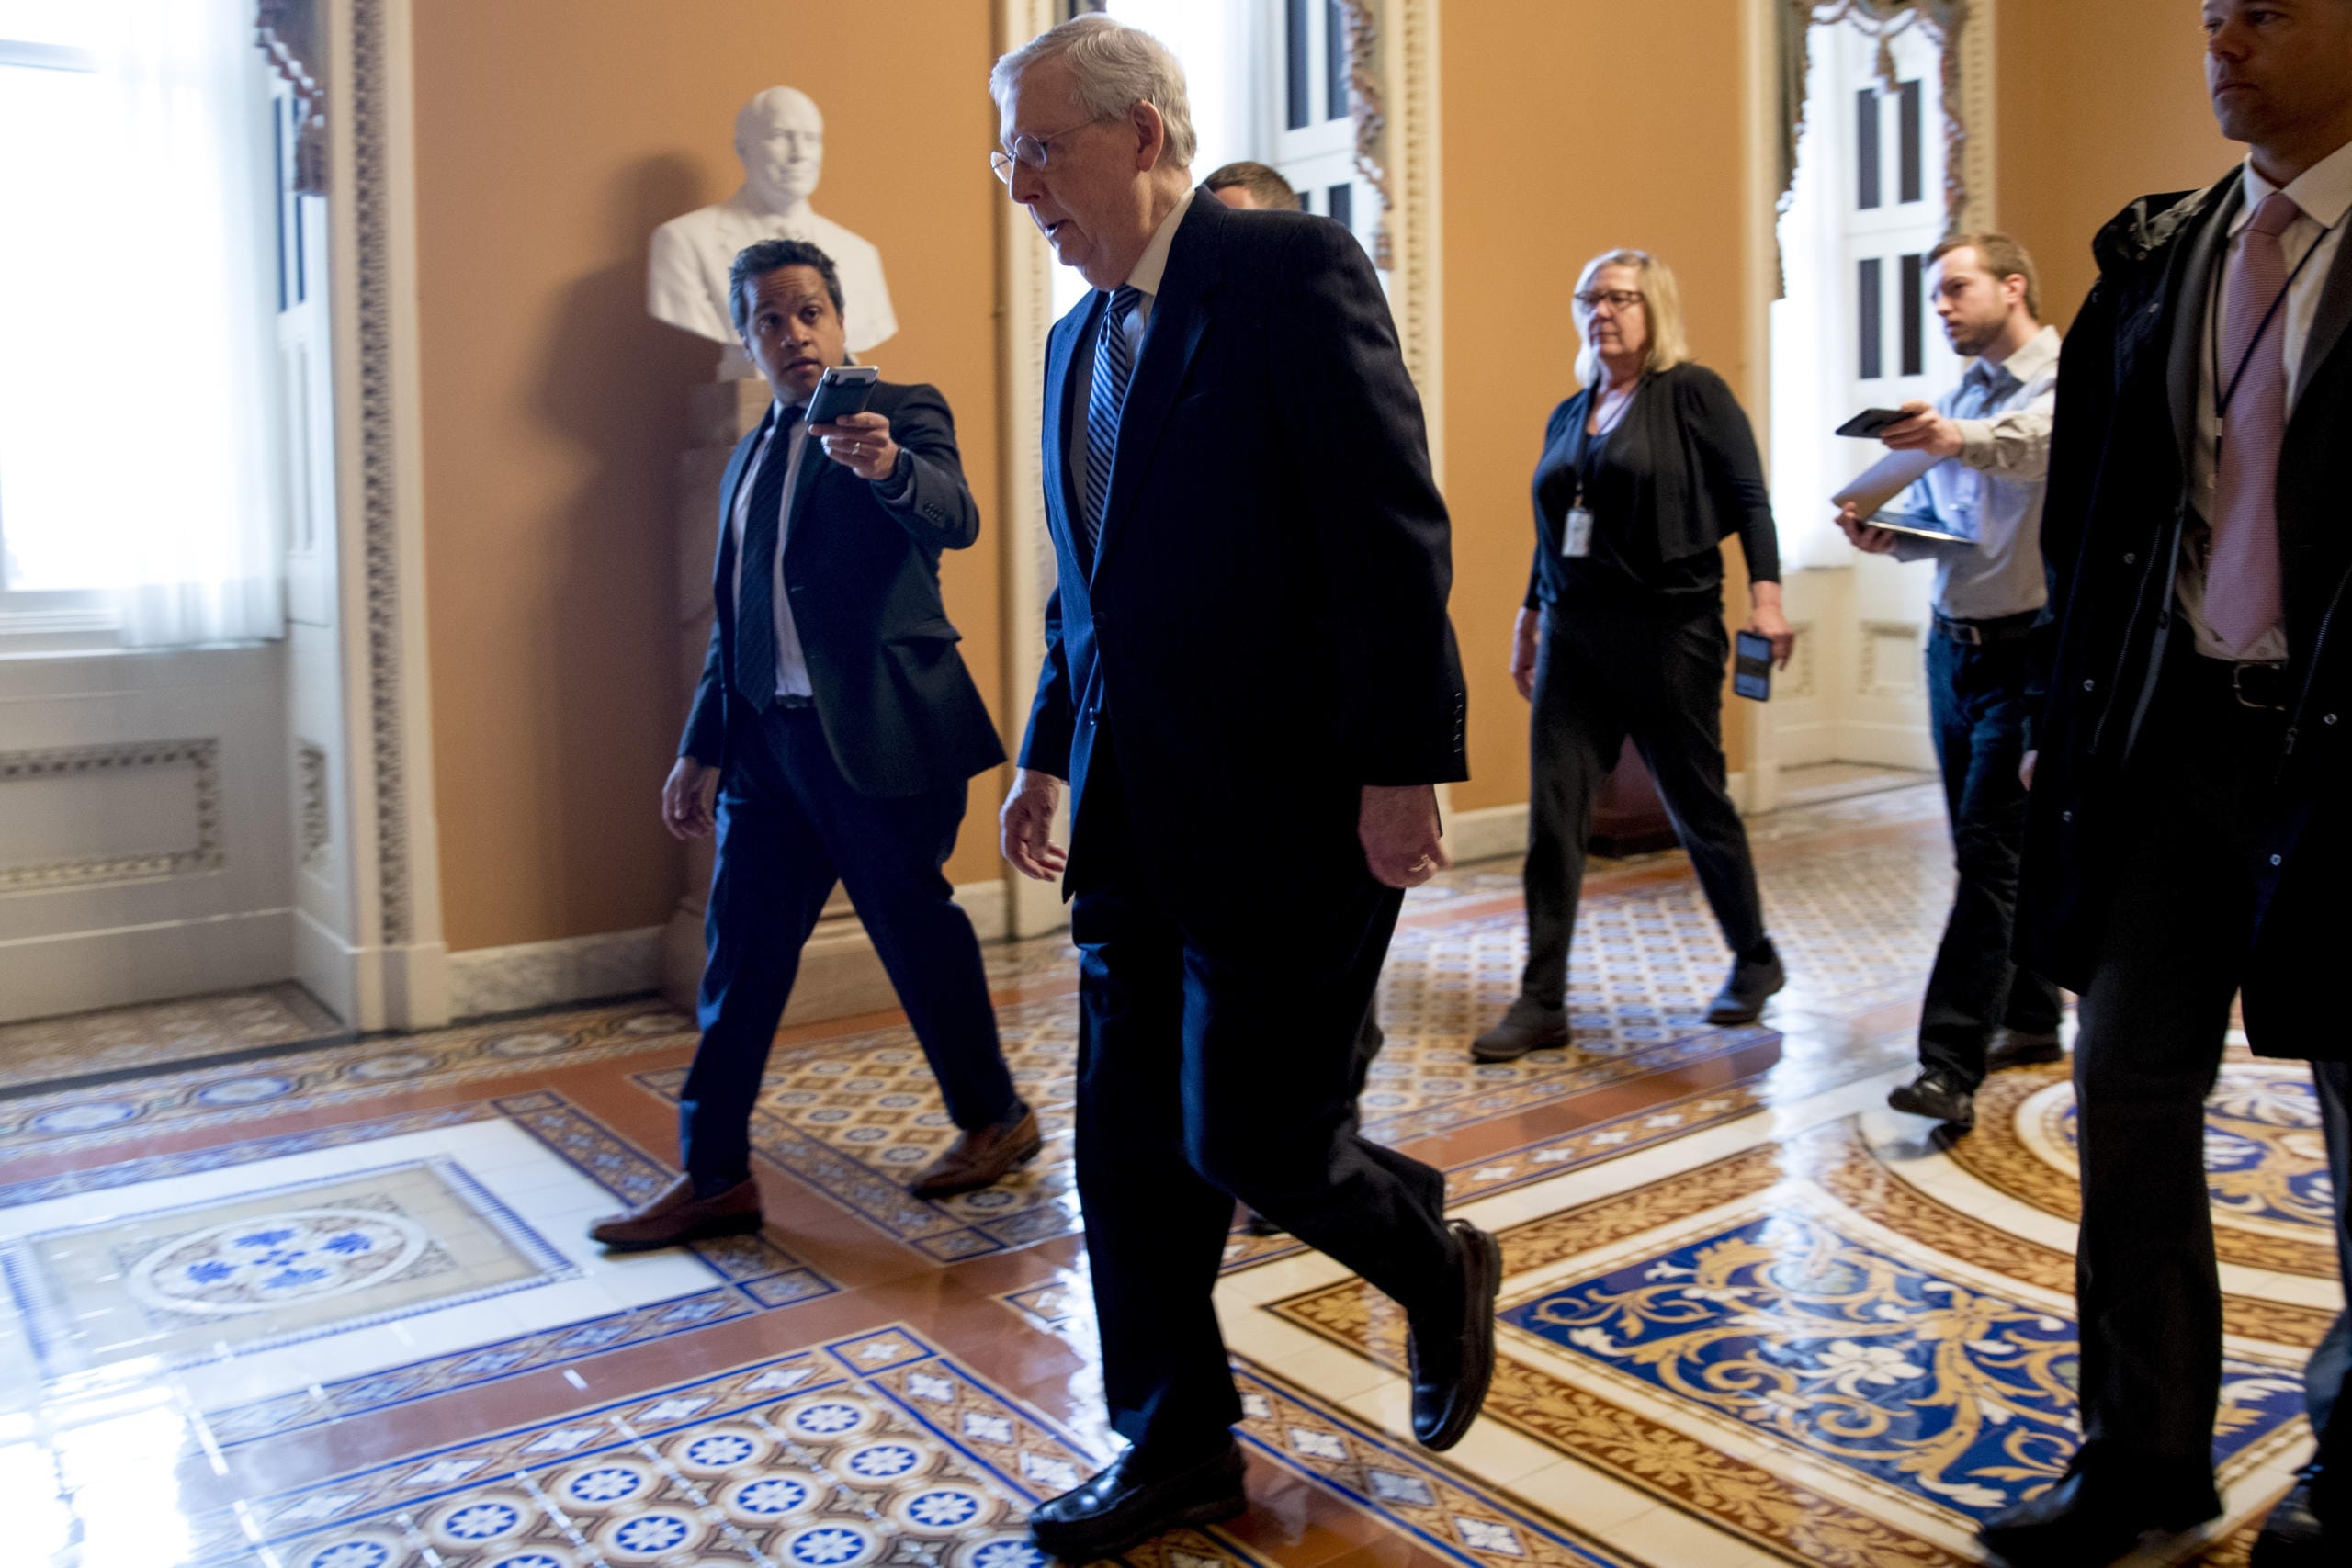 Senate Majority Leader Mitch McConnell of Ky. arrives on Capitol Hill in Washington, Monday, March 23, 2020, as the Senate is working to pass a coronavirus relief bill.